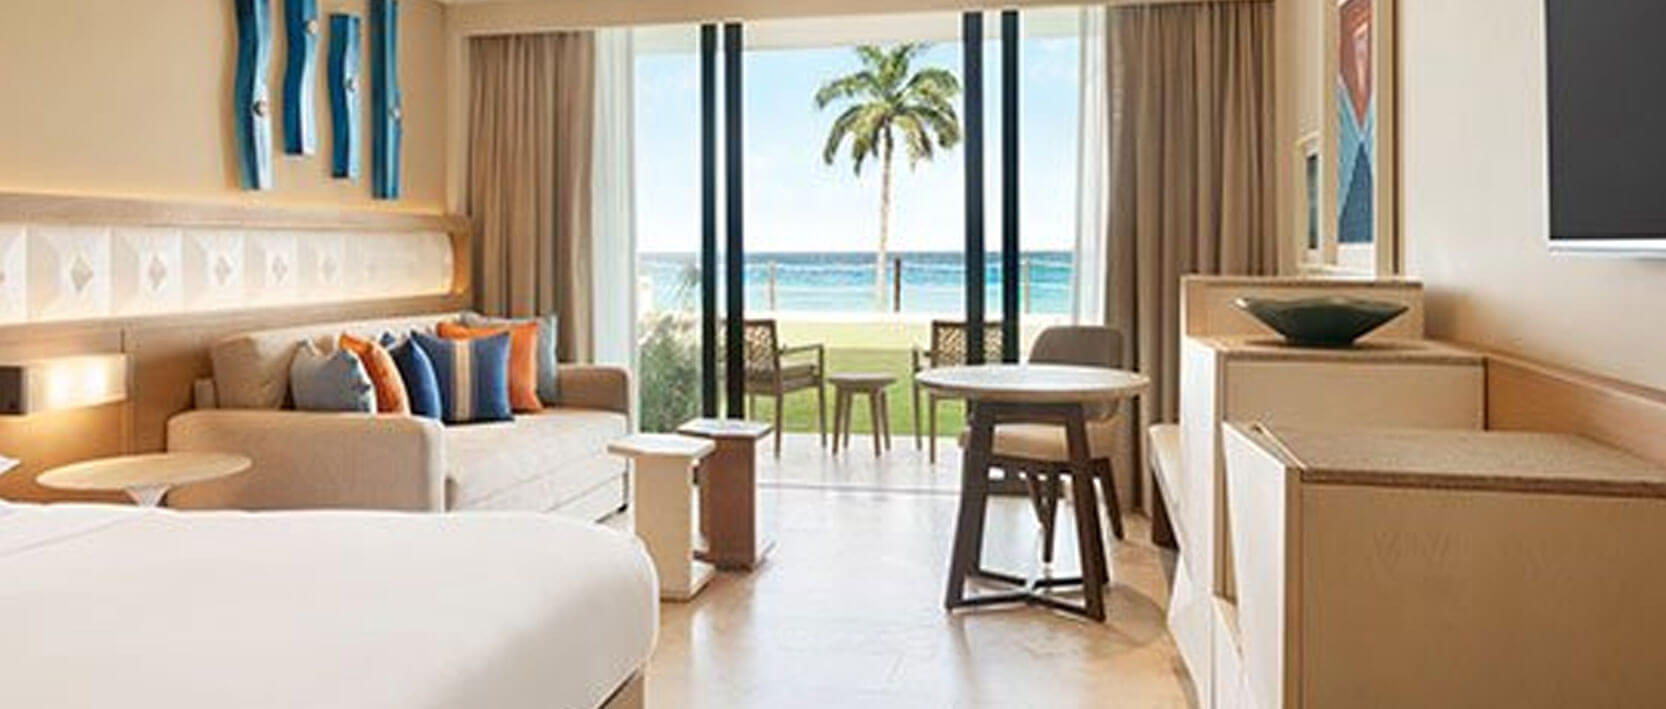 Hyatt Ziva Cancun Accommodations - King (With Sofa Bed) or Double Suite